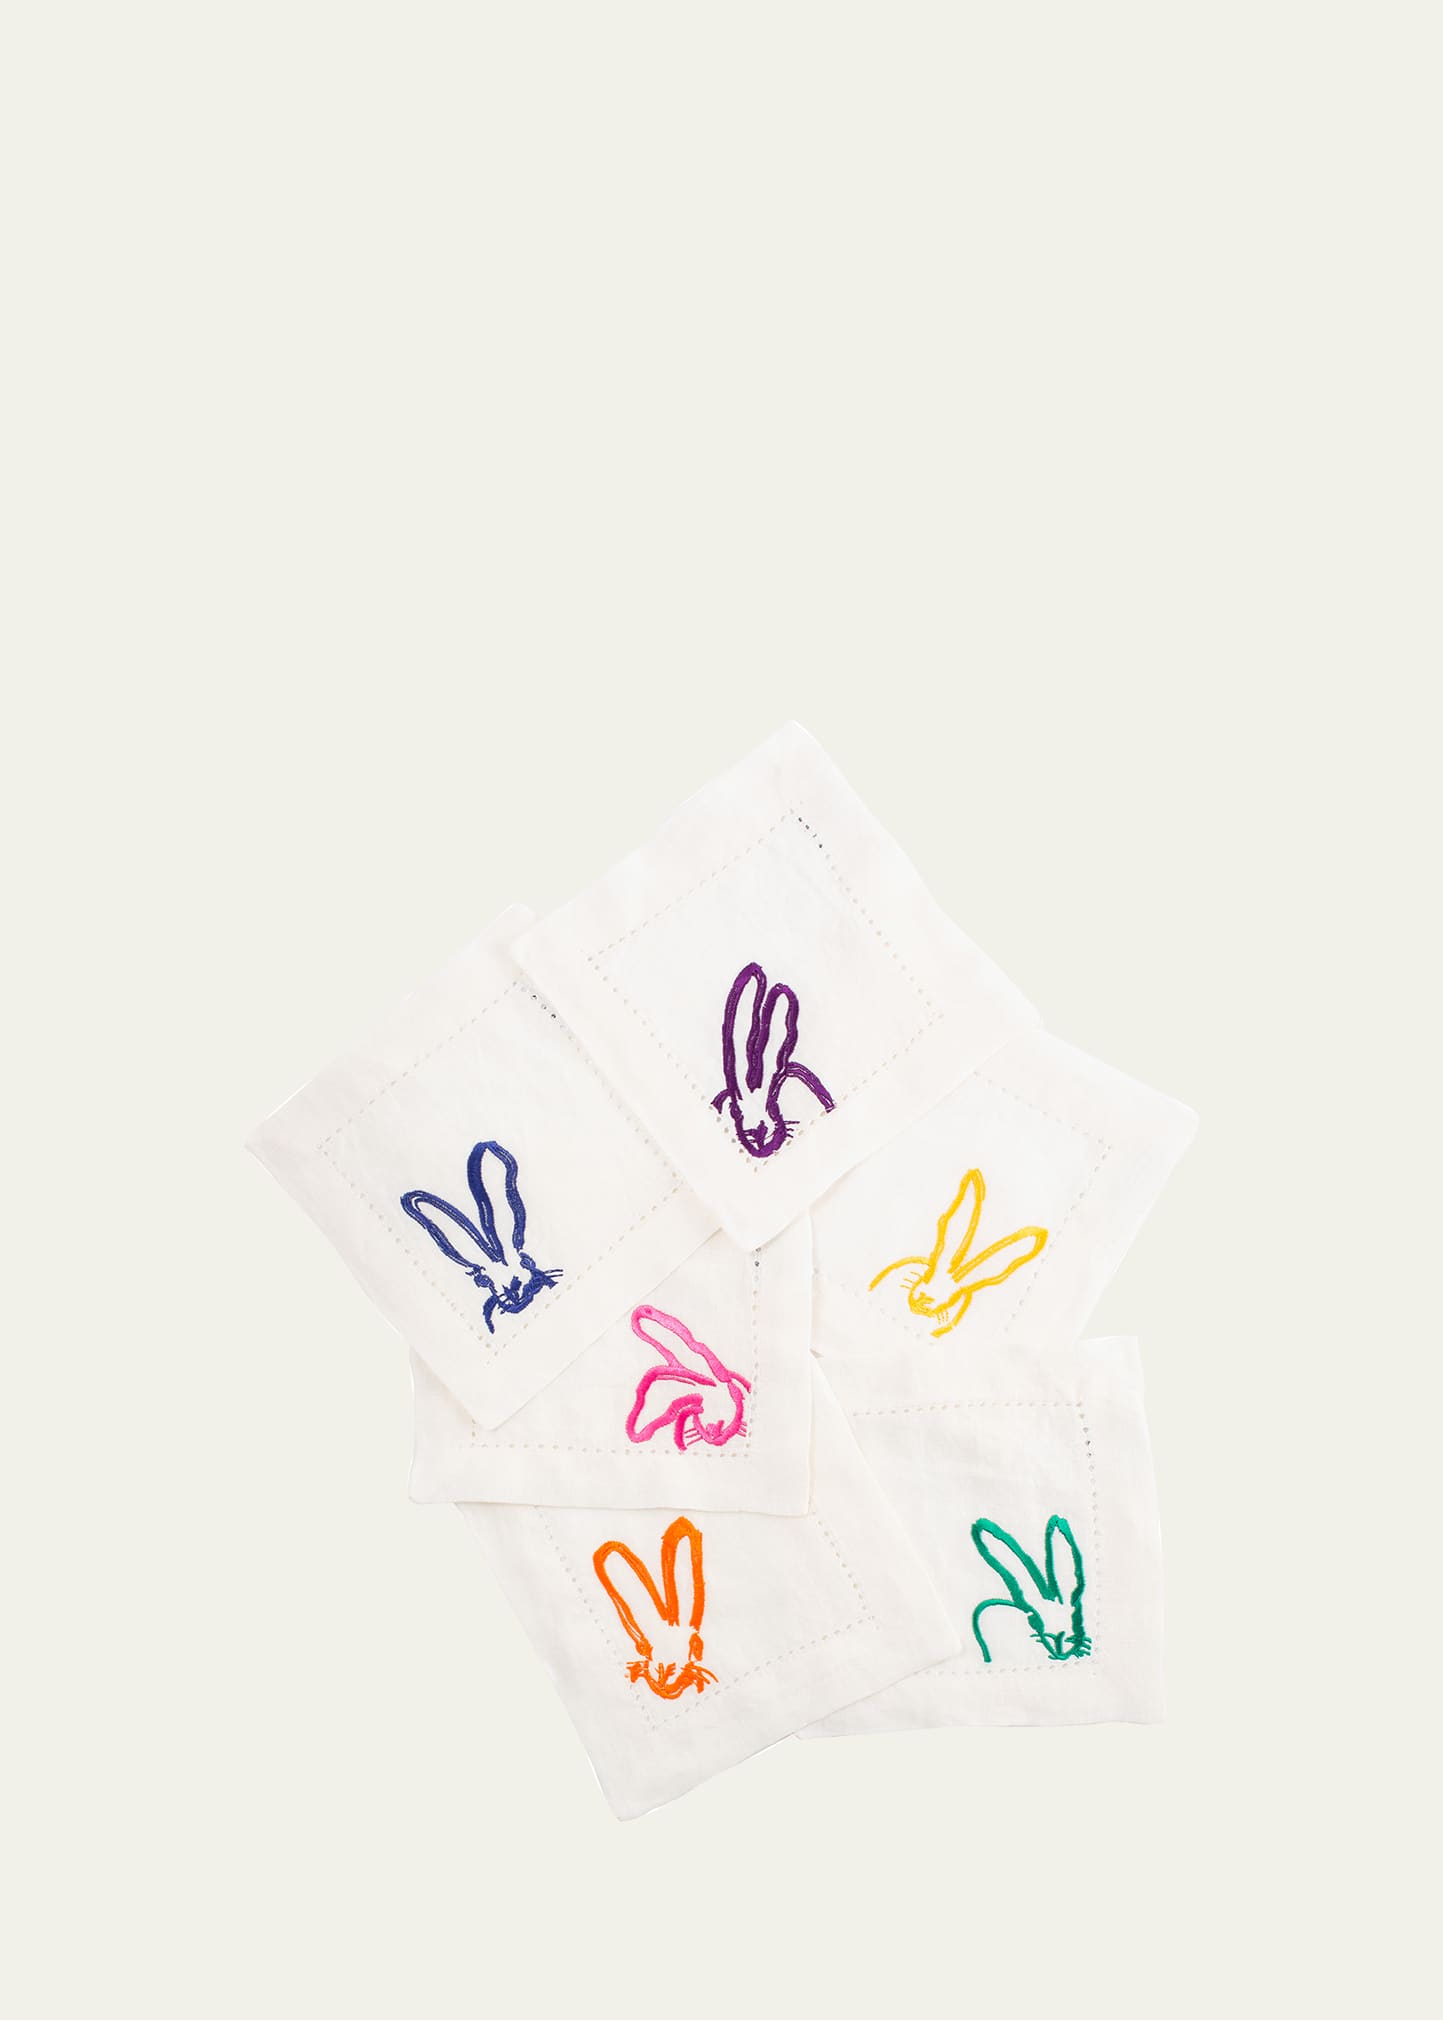 Colorful Bunnies Cocktail Napkins, Set of 6